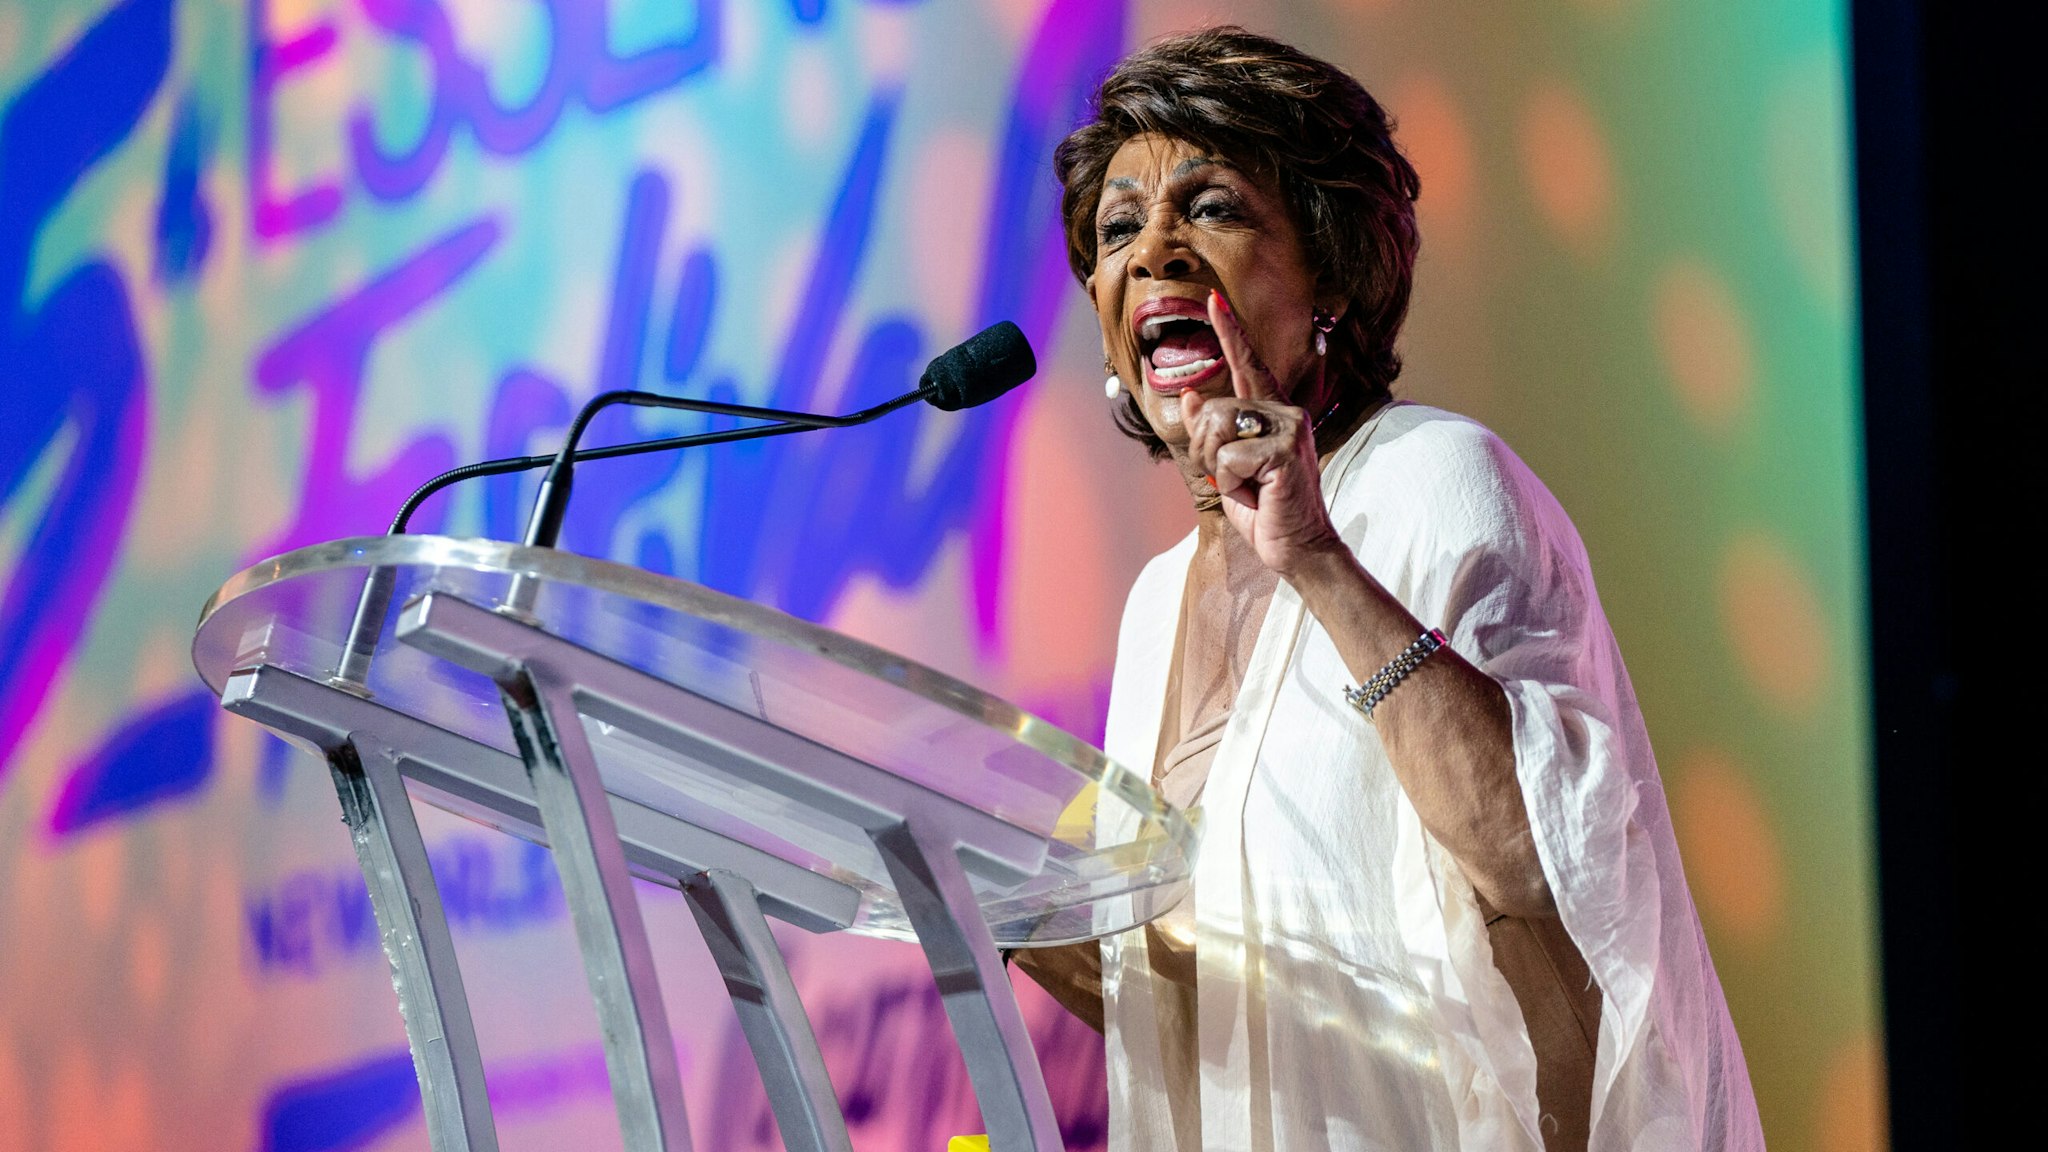 NEW ORLEANS, LOUISIANA - JULY 06: U.S Representative Maxine Waters speaks at the 25th Essence Music Festival at Ernest N. Morial Convention Center on July 06, 2019 in New Orleans, Louisiana.